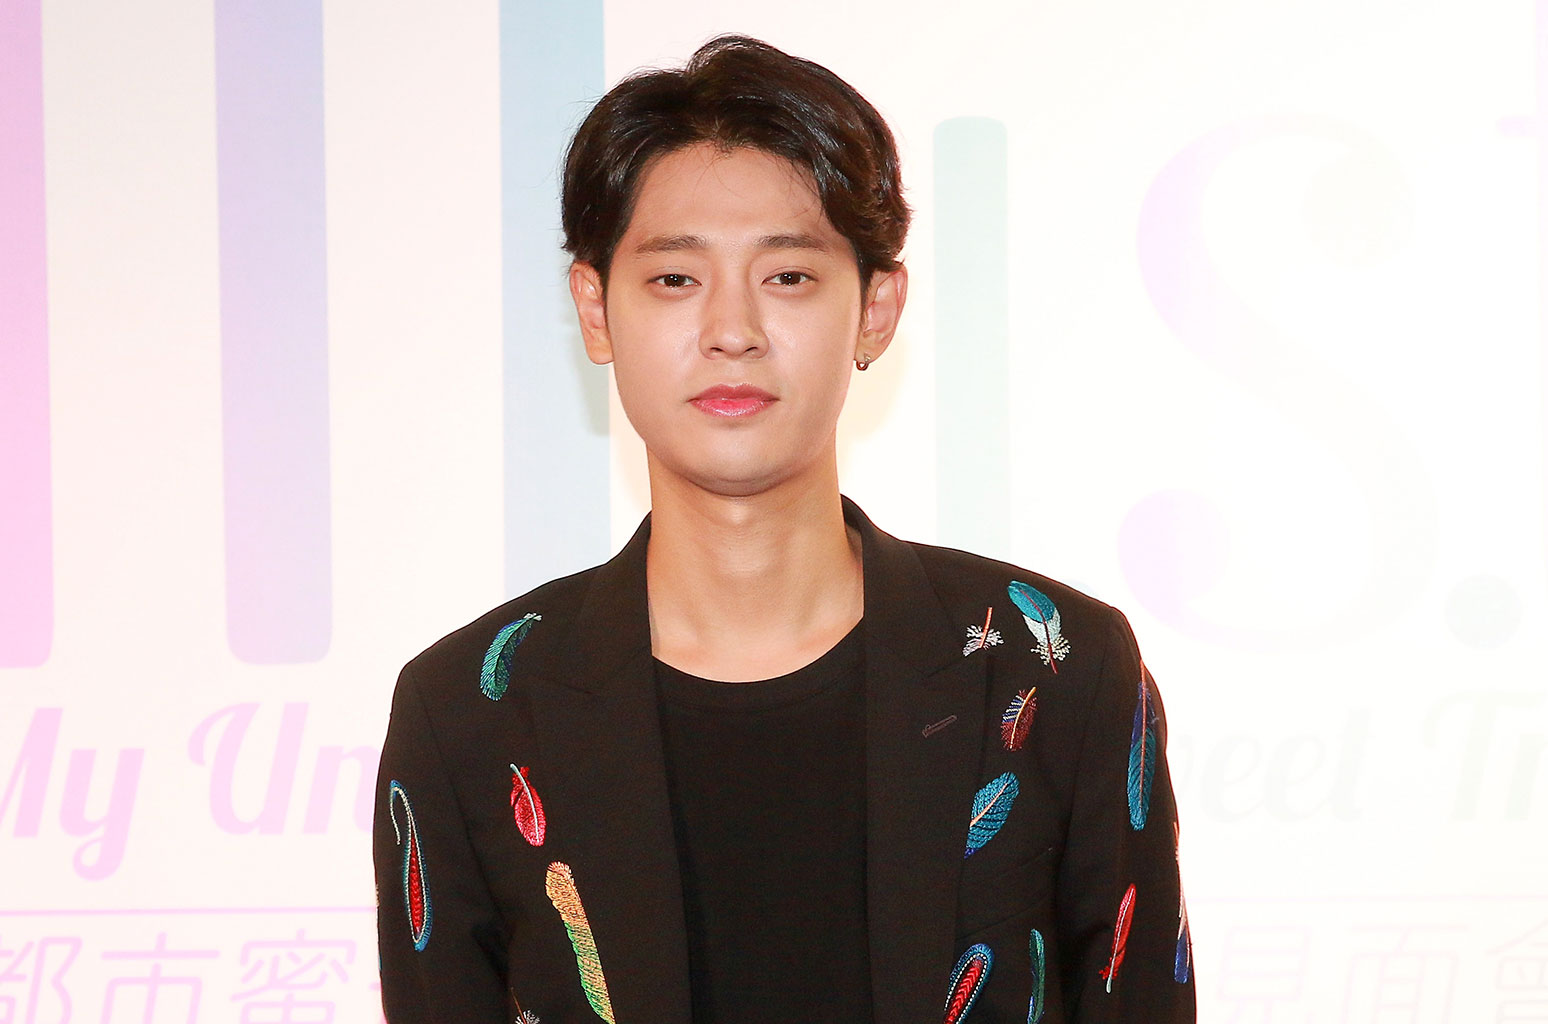 HONG KONG - OCTOBER 10:  South Korean singer-songwriter Jung Joon-young attends a press conference of tvN travel program on October 10, 2017 in Hong Kong, China.  (Photo by VCG/VCG via Getty Images)